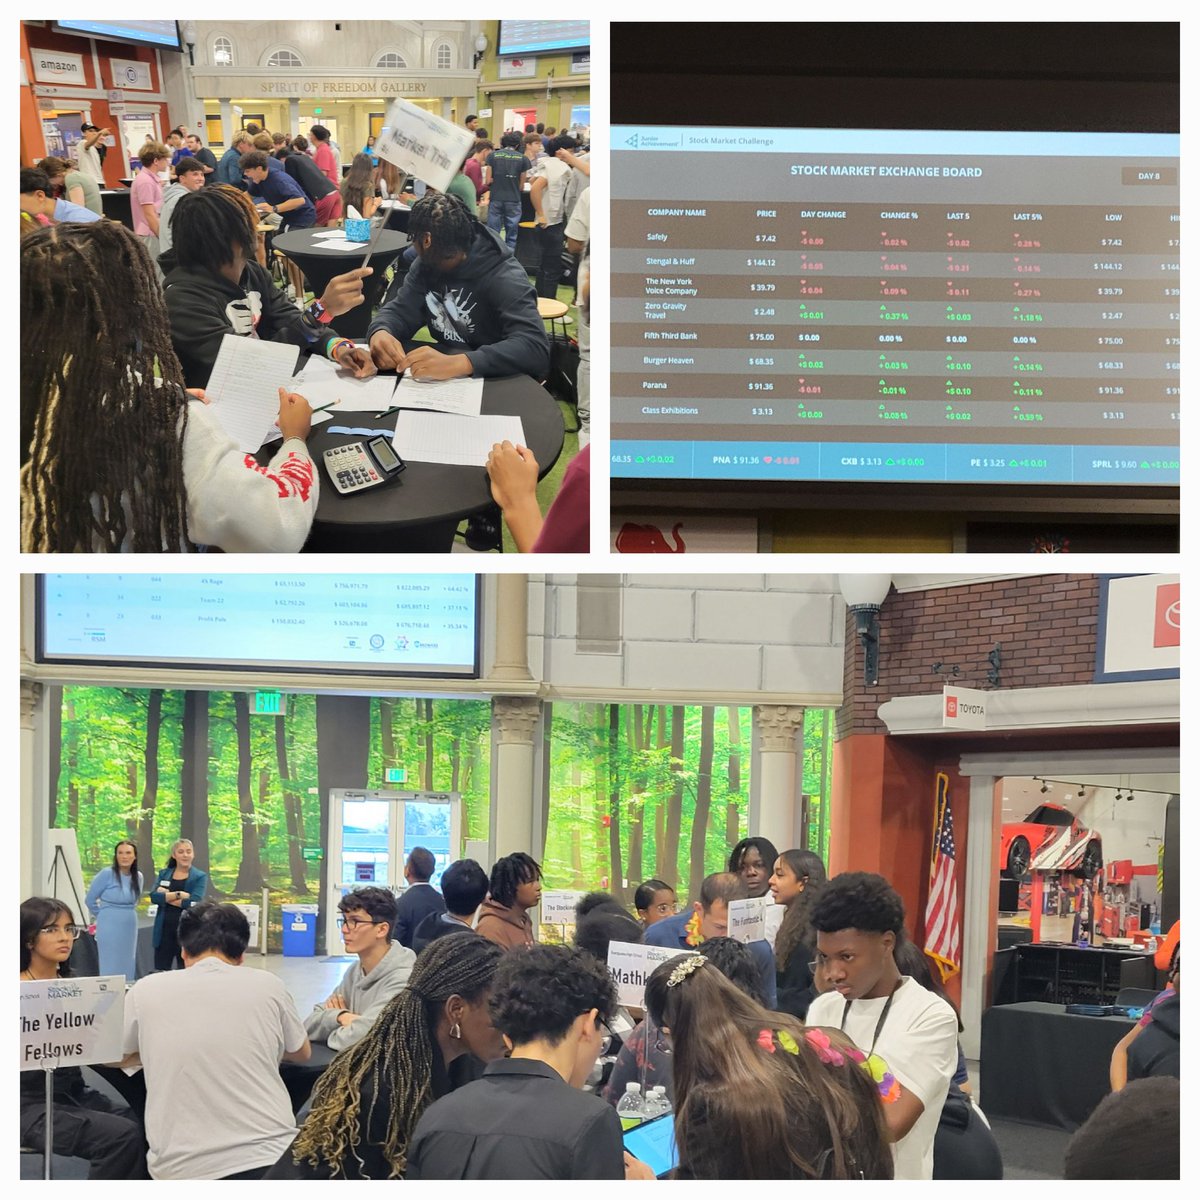 Awesome day at JA World hosting their Stock Market Challenge. Our students had the opportunity to apply previously learned financial literacy concepts. It was like being on the trading floor of Wall Street. Shout out to @JASouthFlorida for creating relevant experiences like this